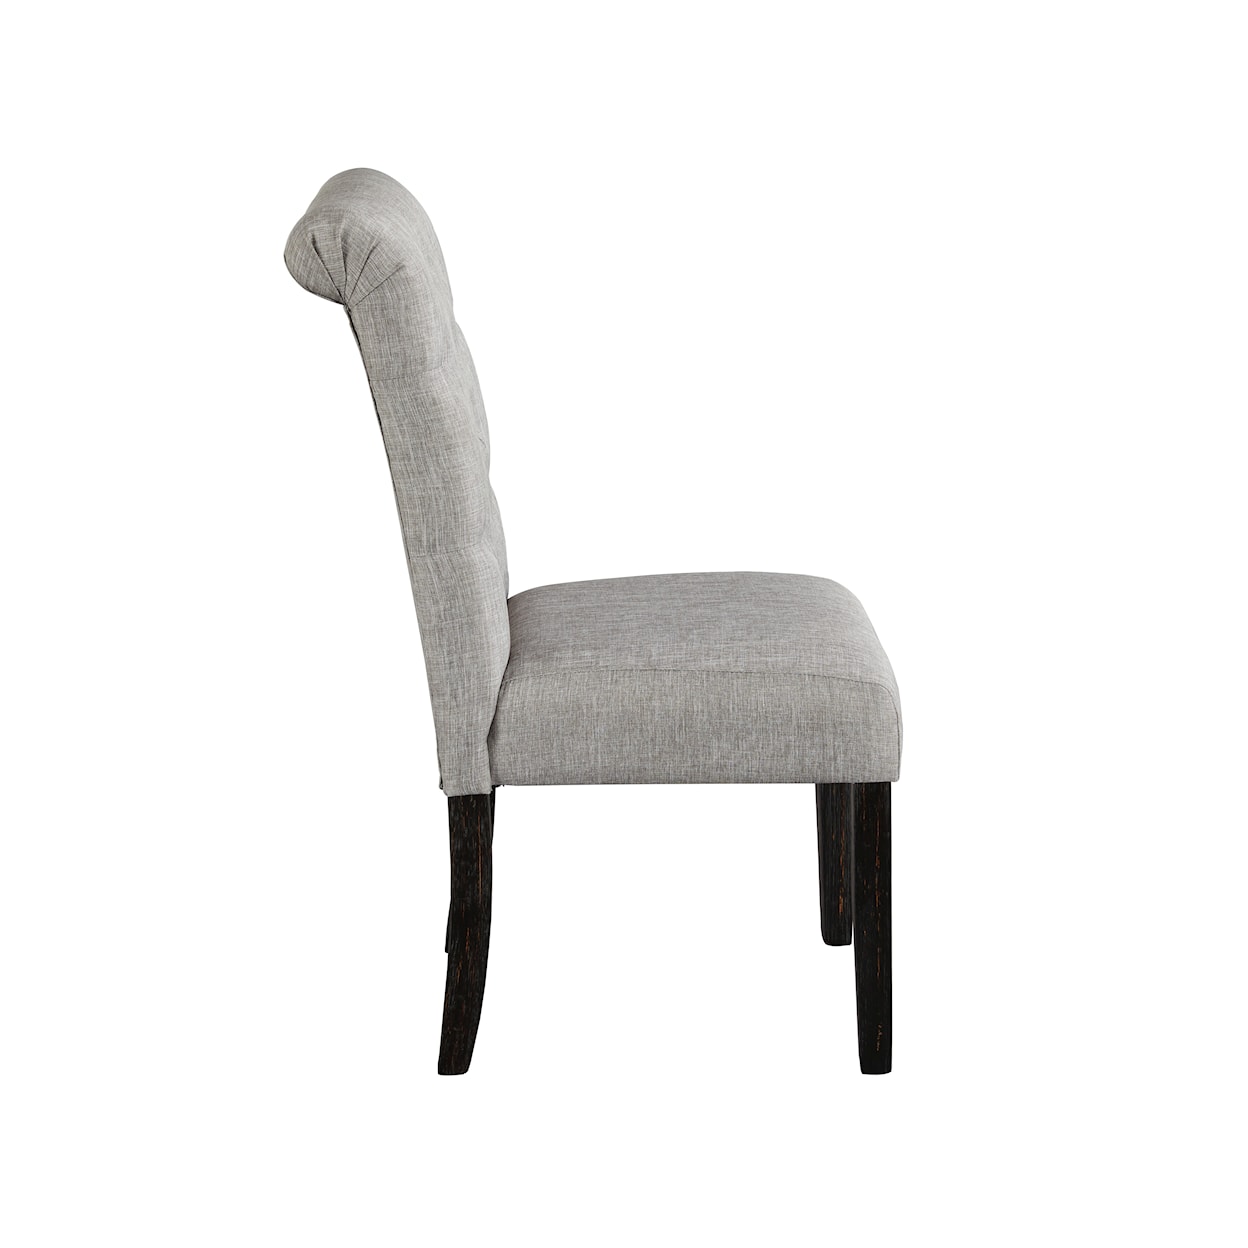 Signature Design by Ashley Broshound Dining Chair